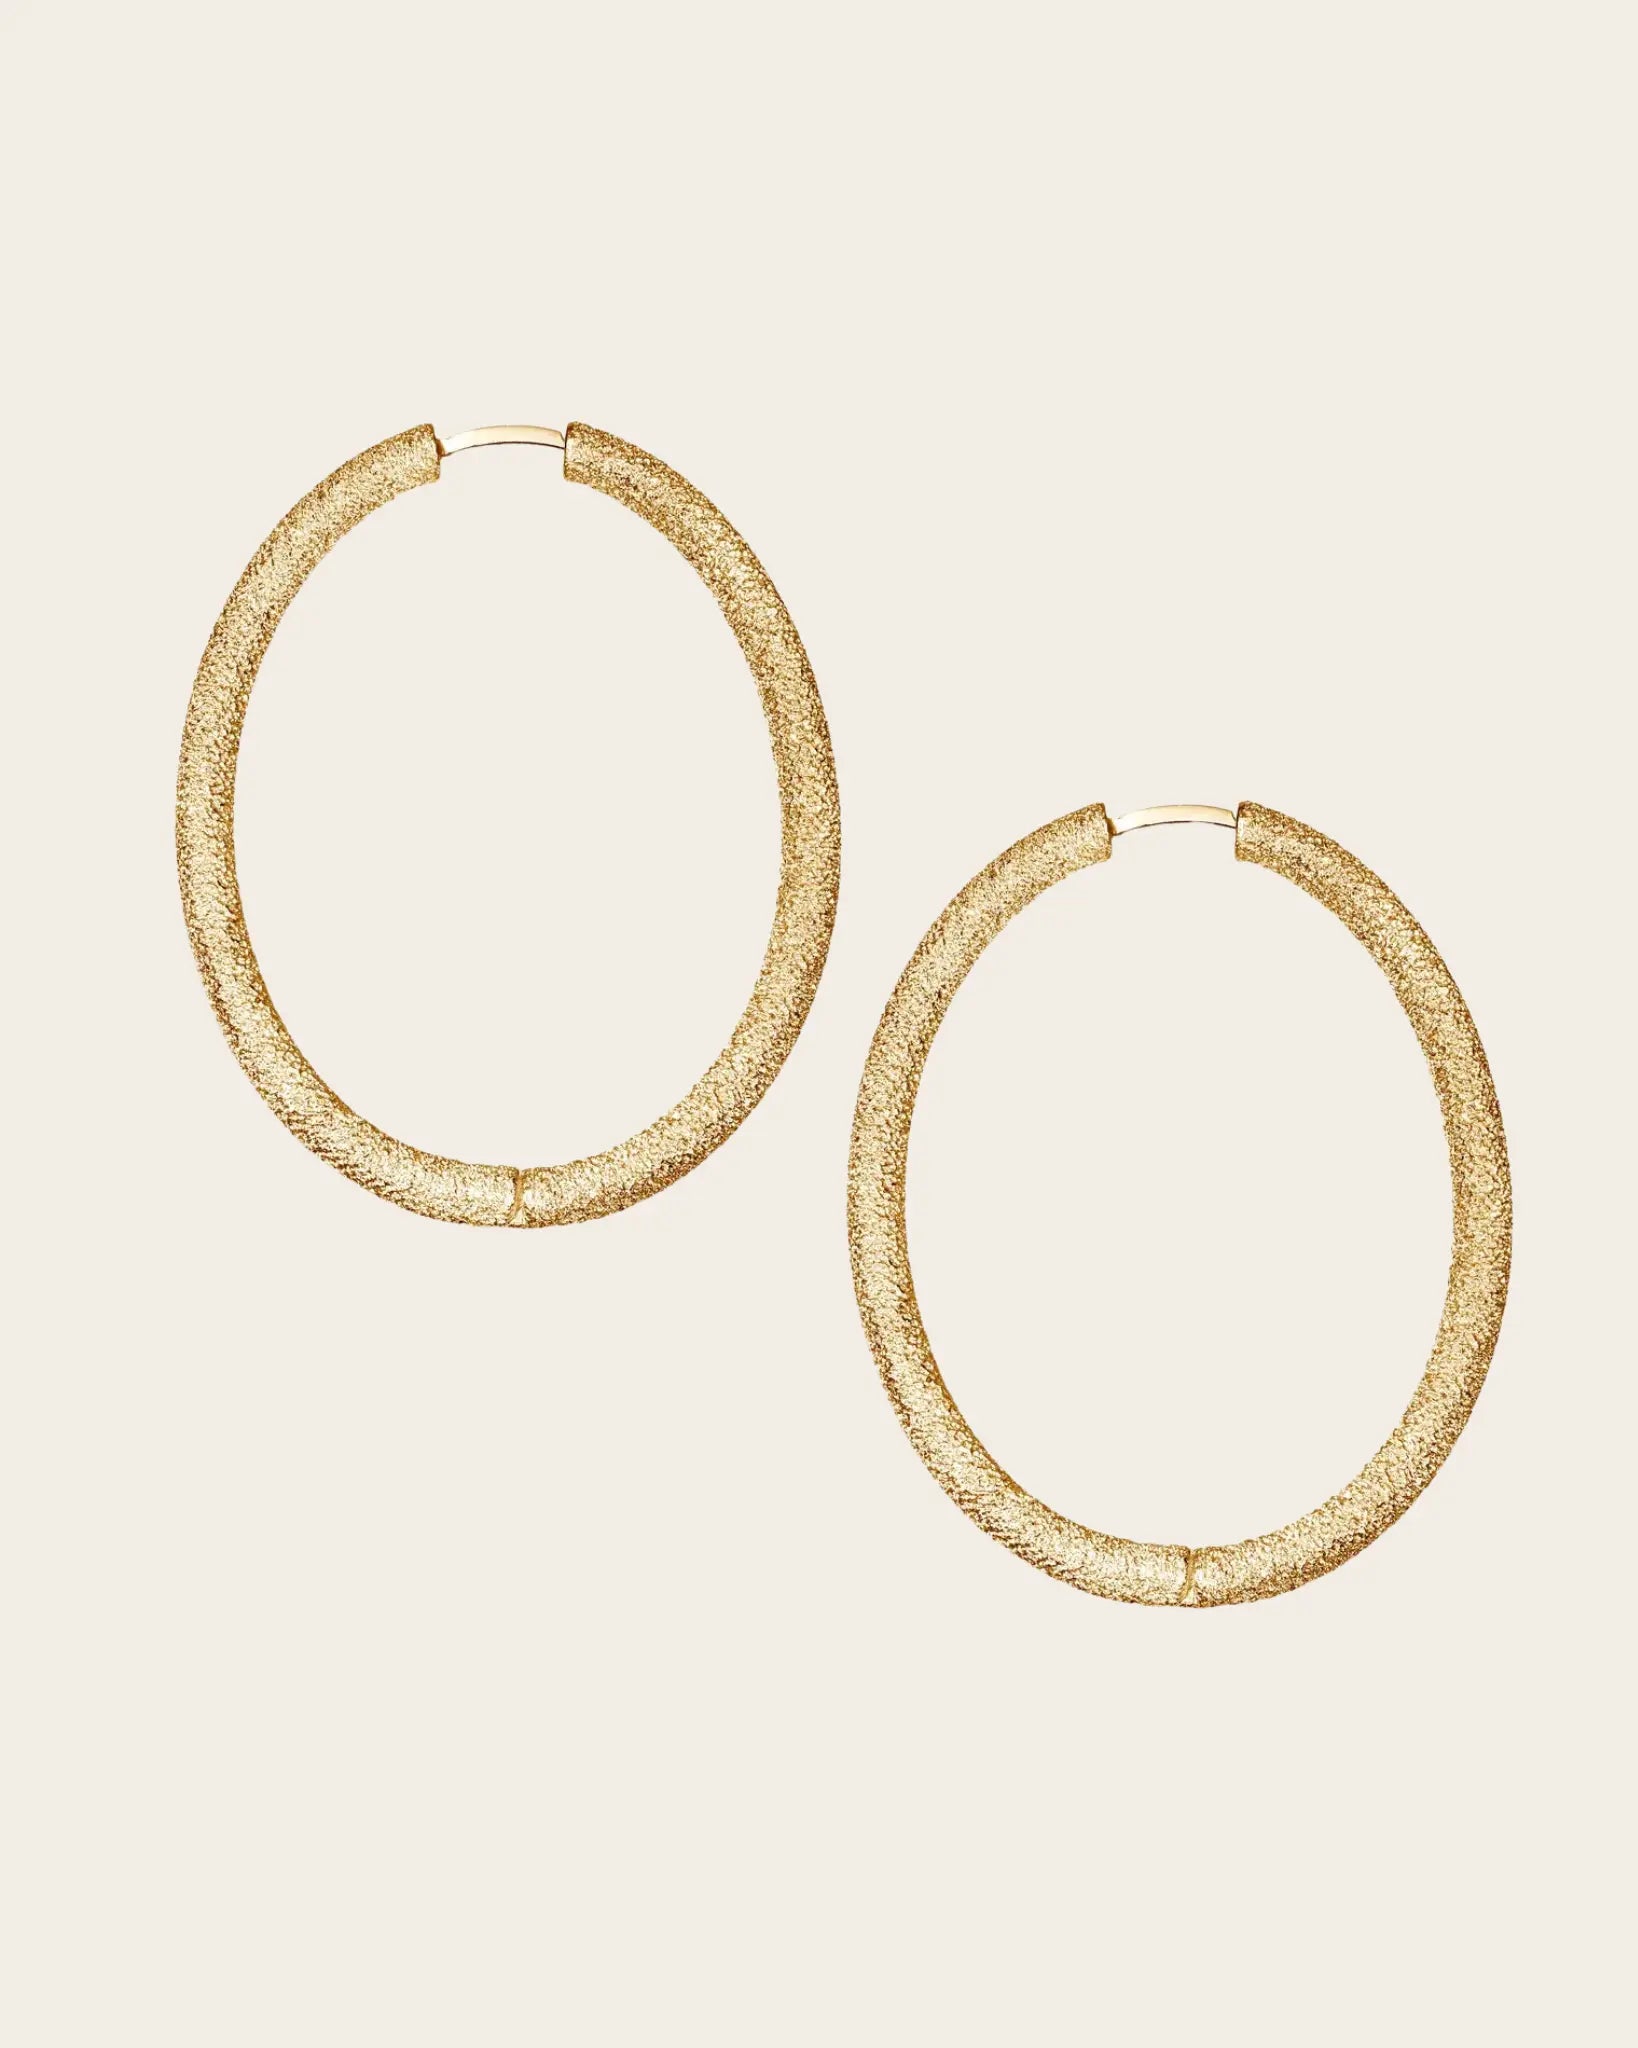 Large Oval Florentine Hoop Earrings Large Oval Florentine Hoop Earrings Carolina Bucci Carolina Bucci  Squash Blossom Vail